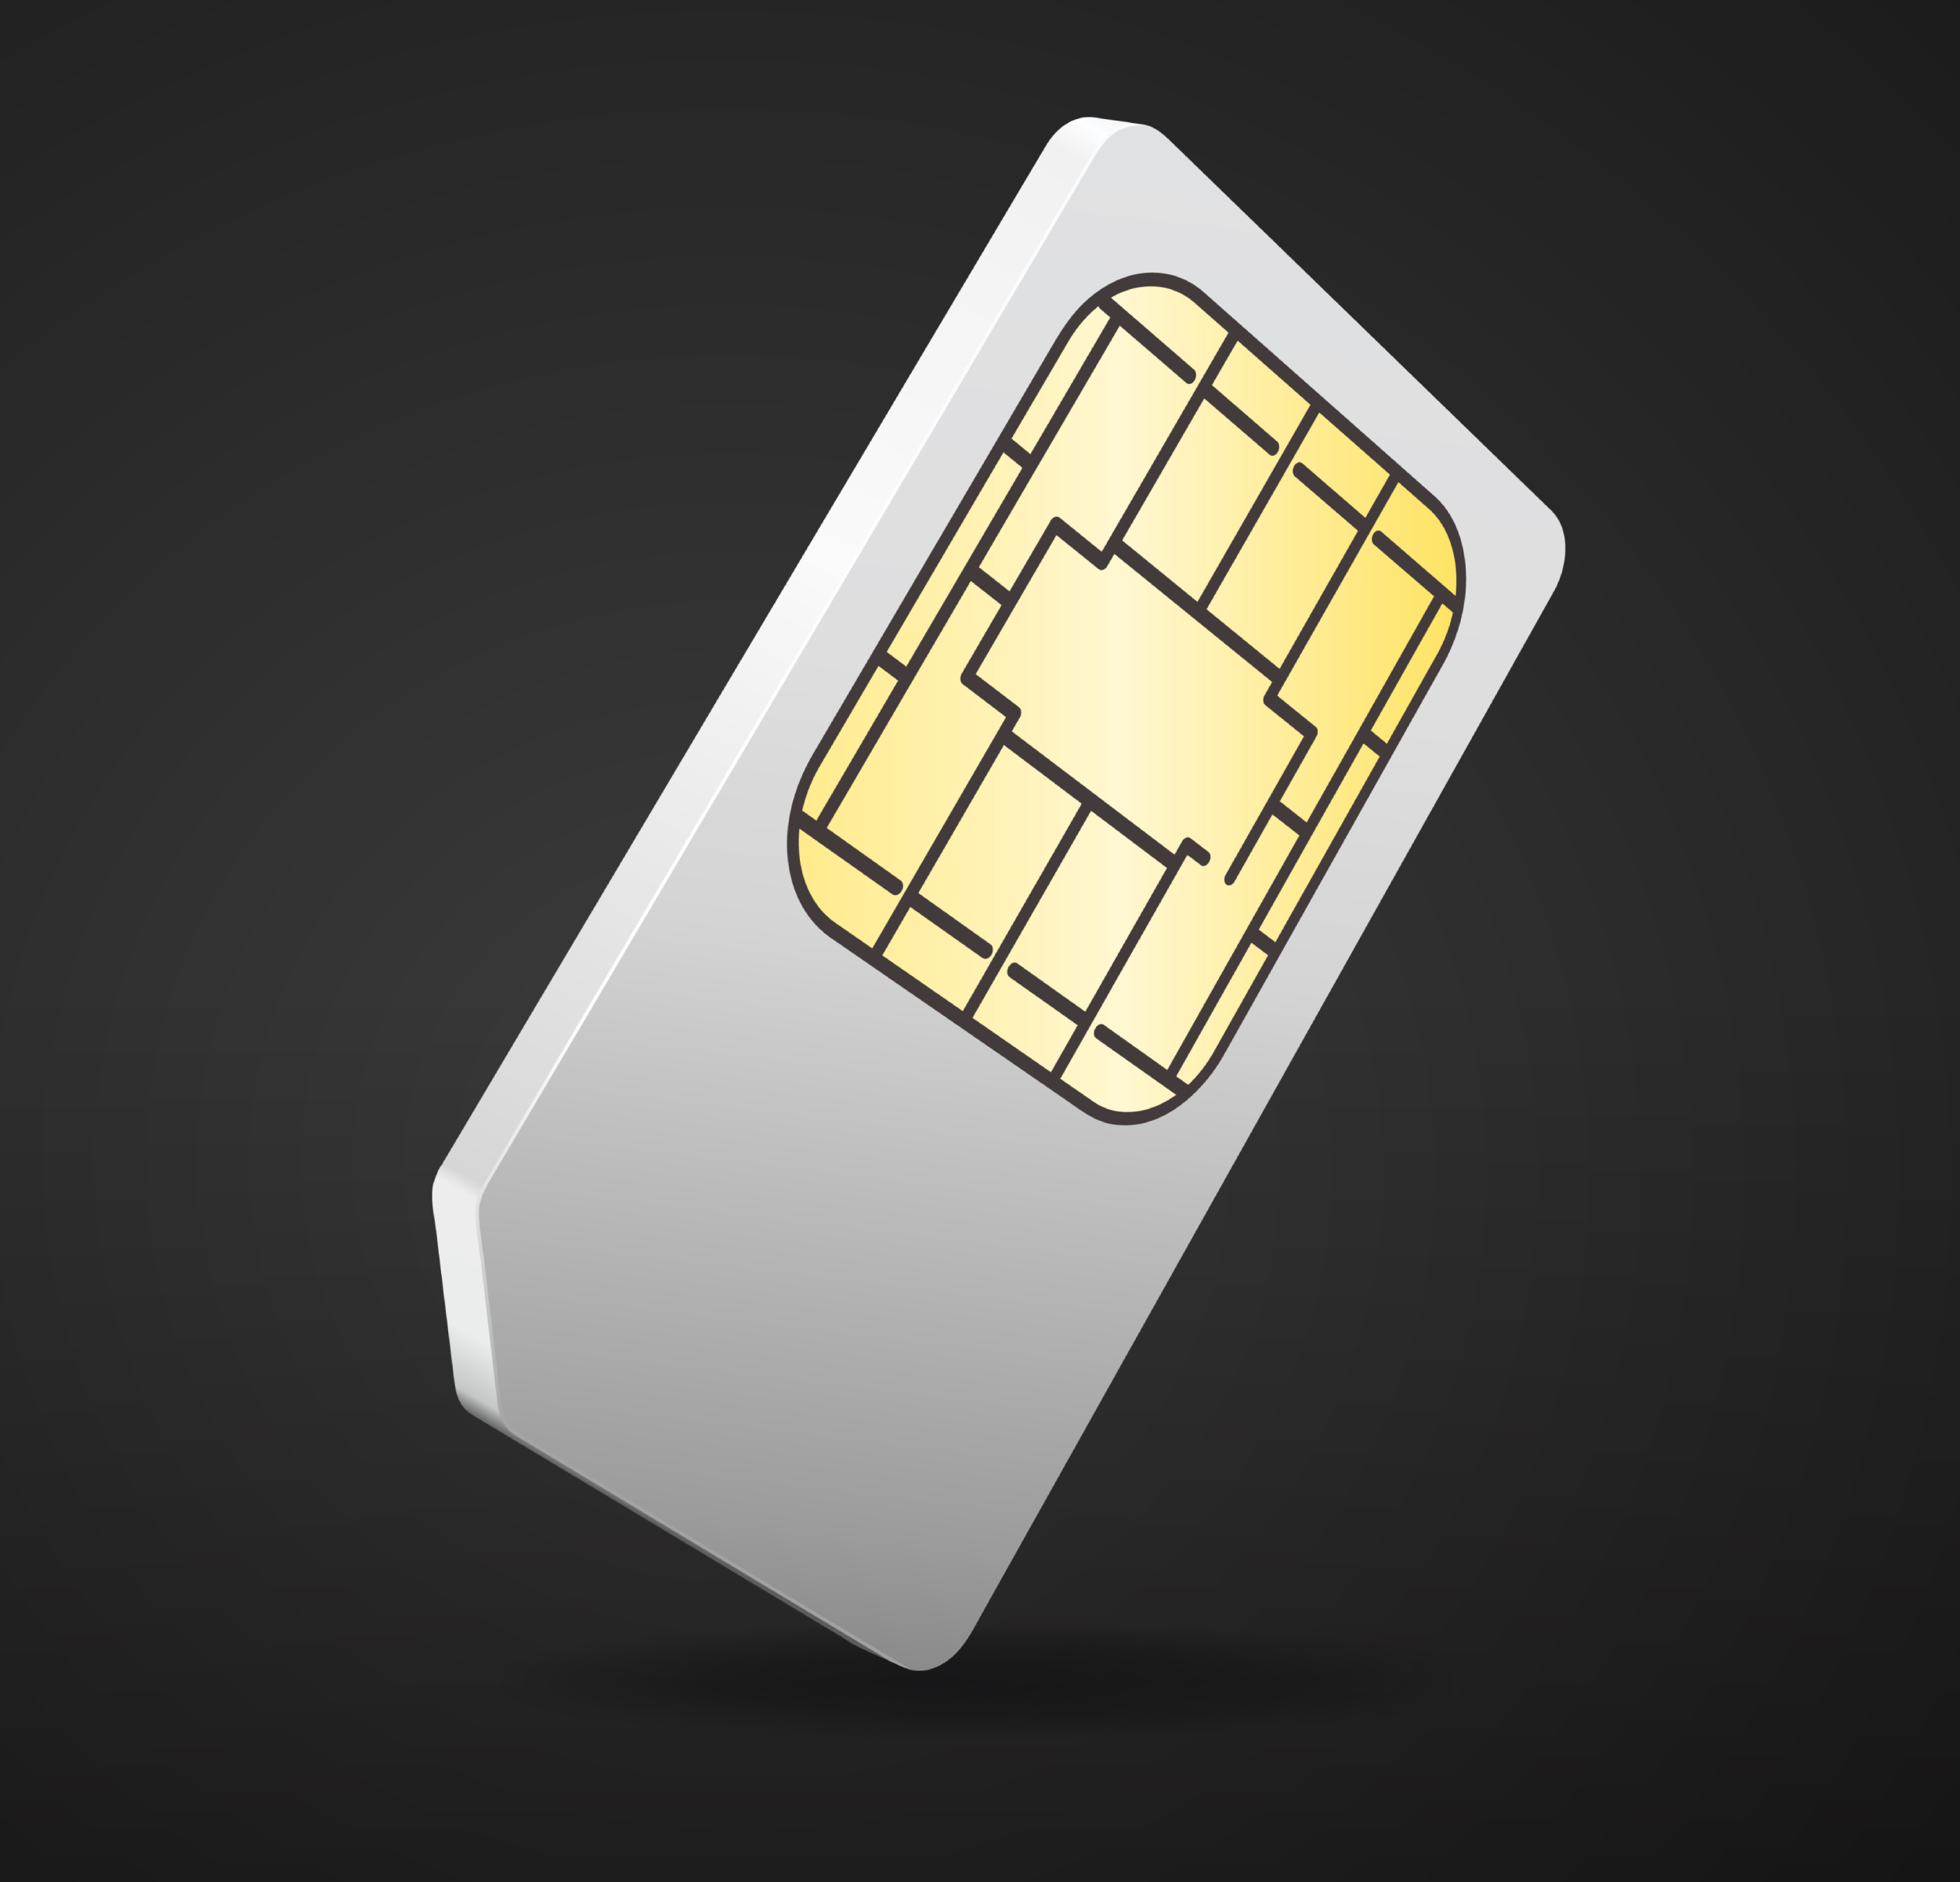 I simplified image of a mobile phone sim card on a black background